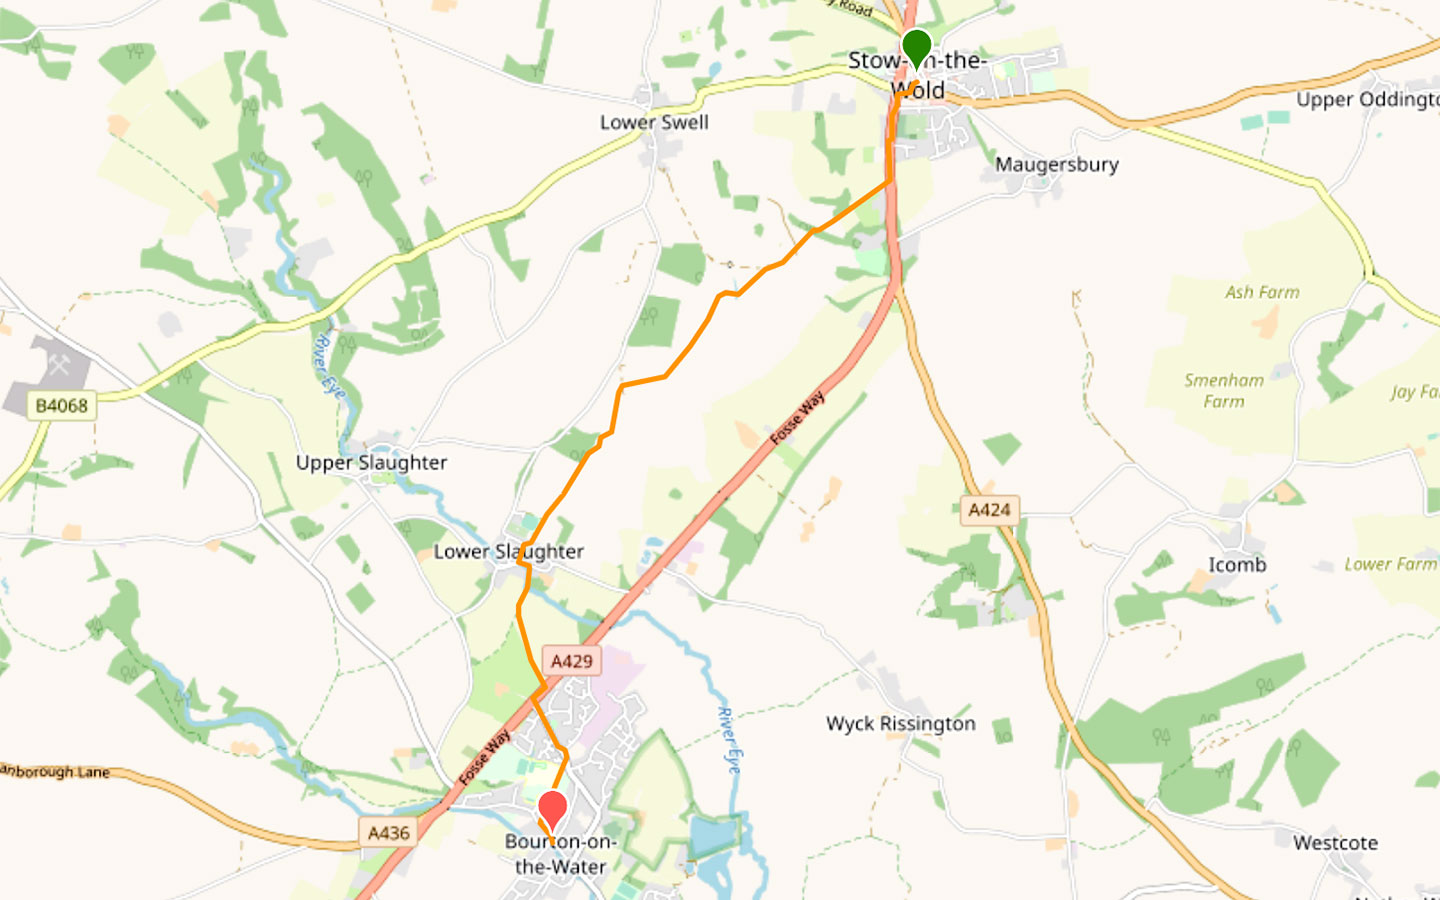 Map for the Stow-on-the-Wold to Bourton-on-the-Water walk in the Cotswolds